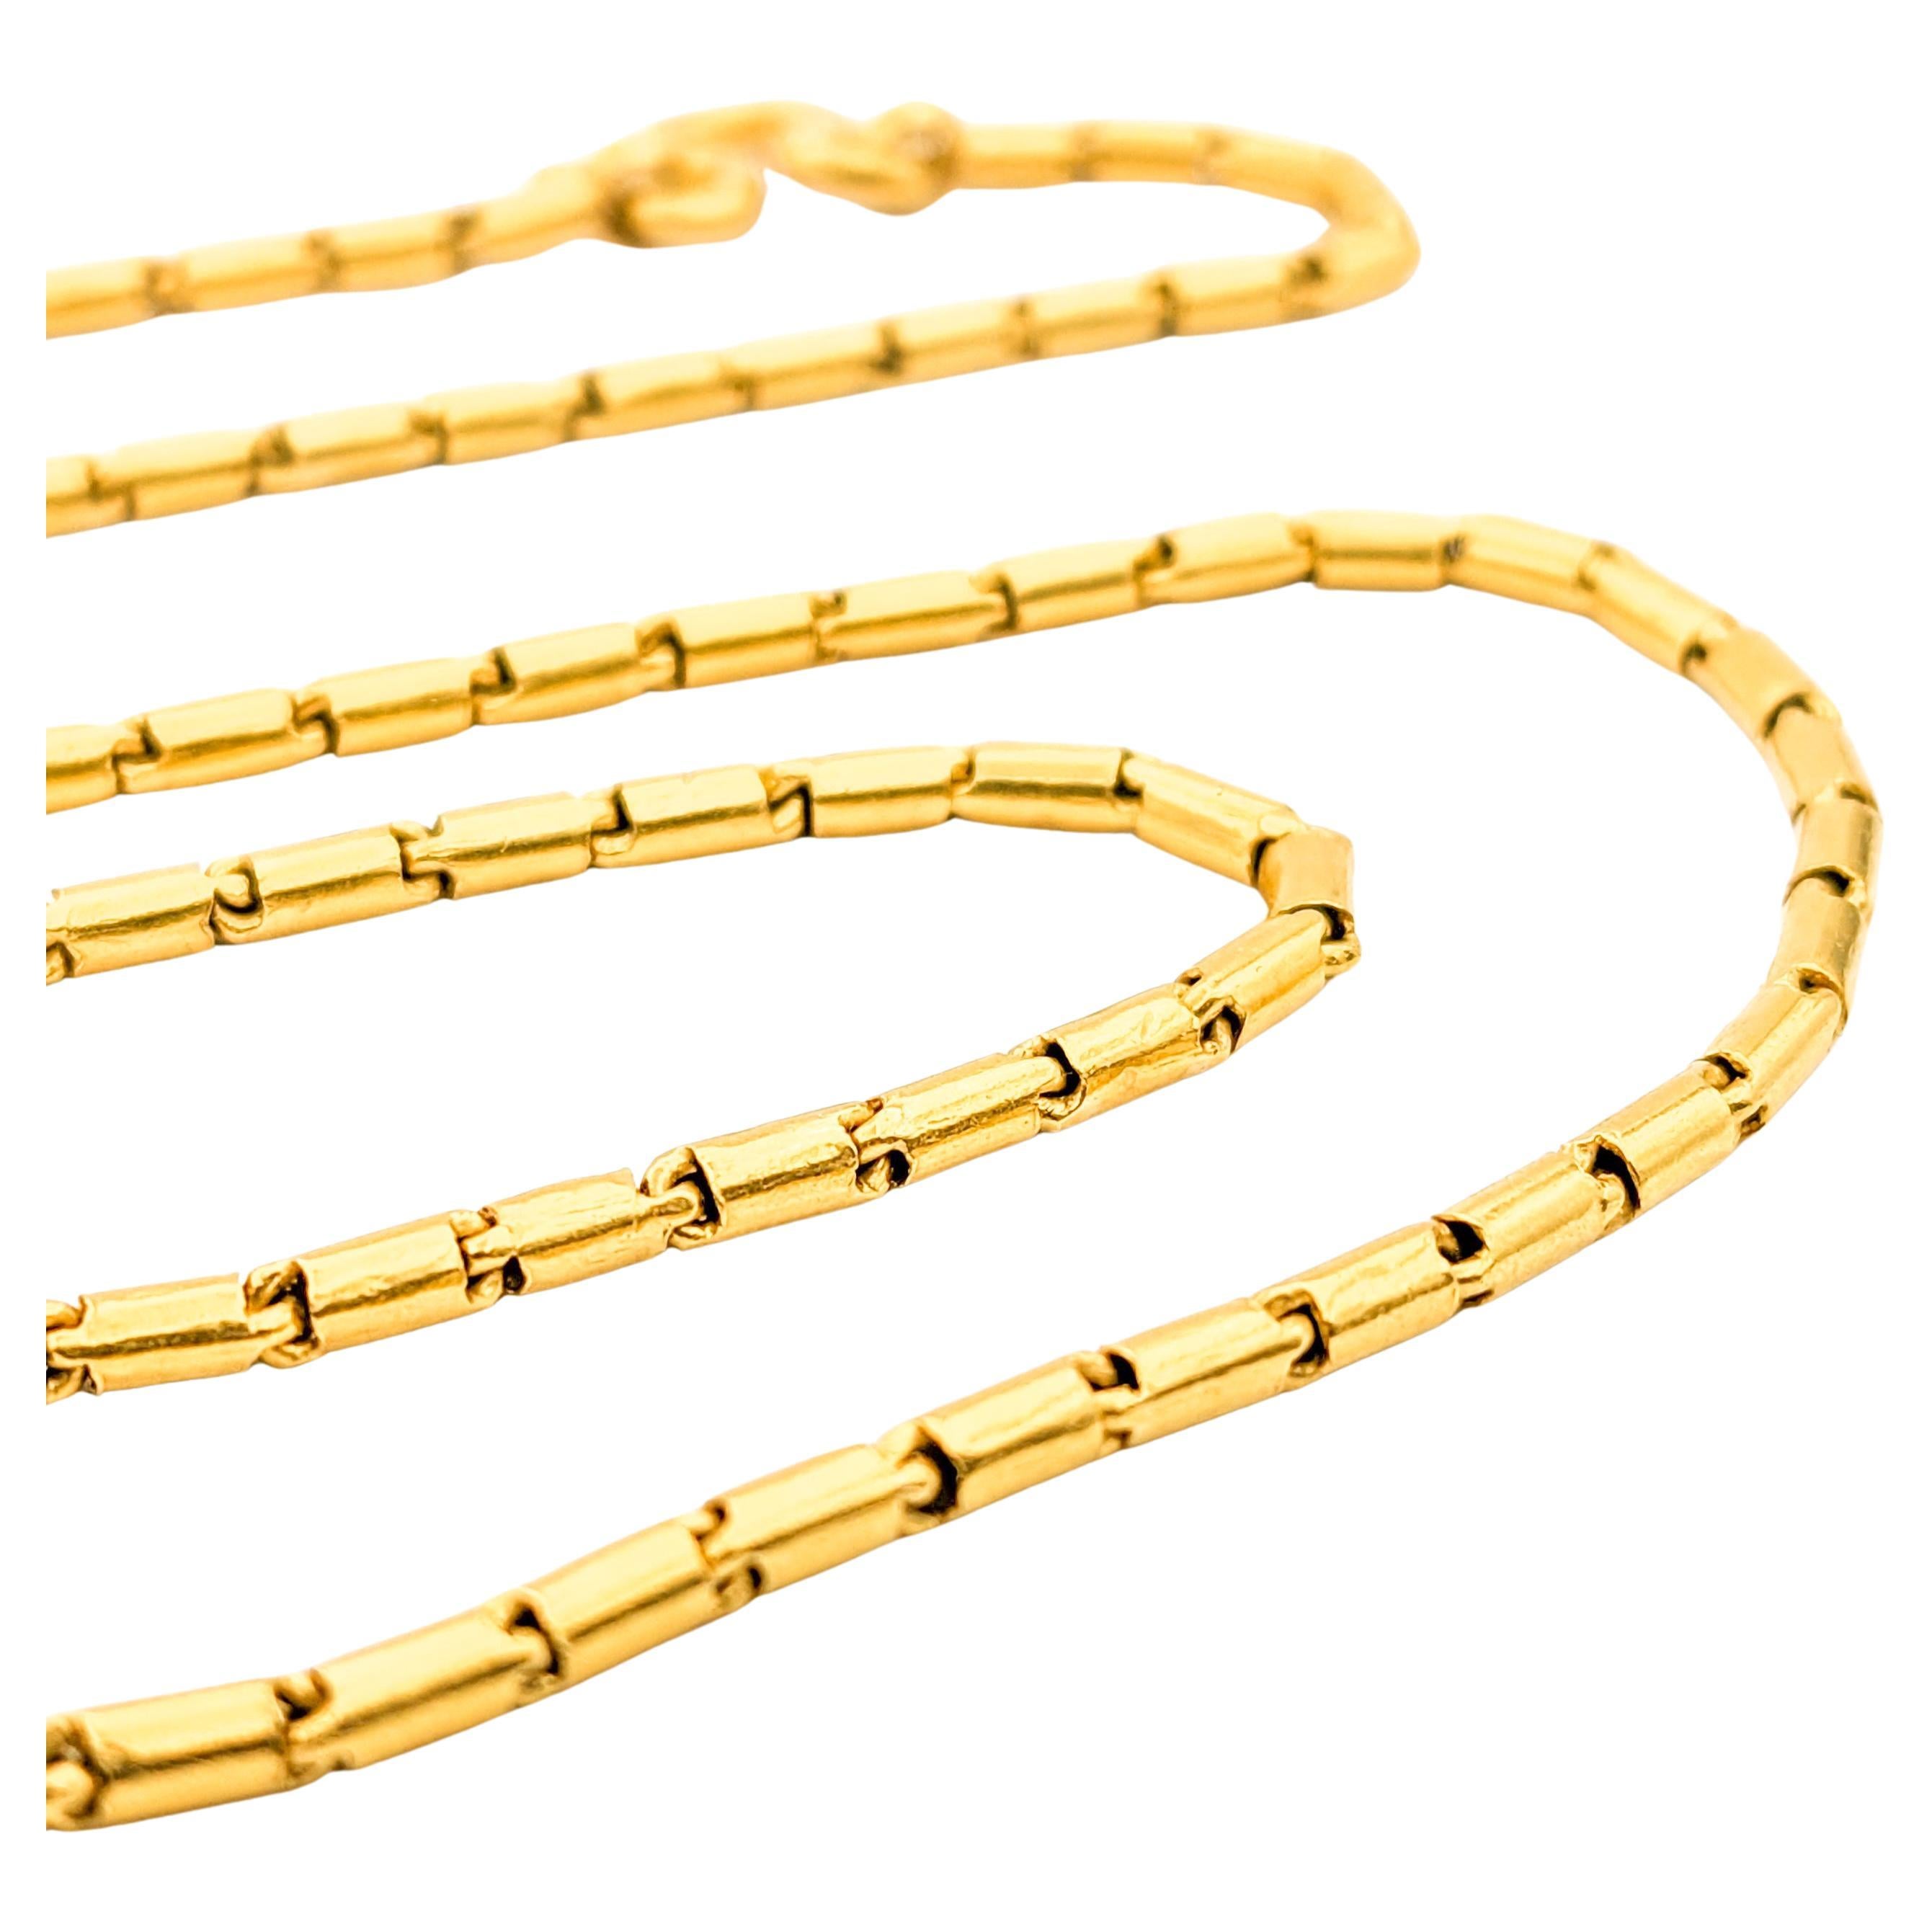 Vintage Barrel Link Chain Necklace in 21k Yellow Gold